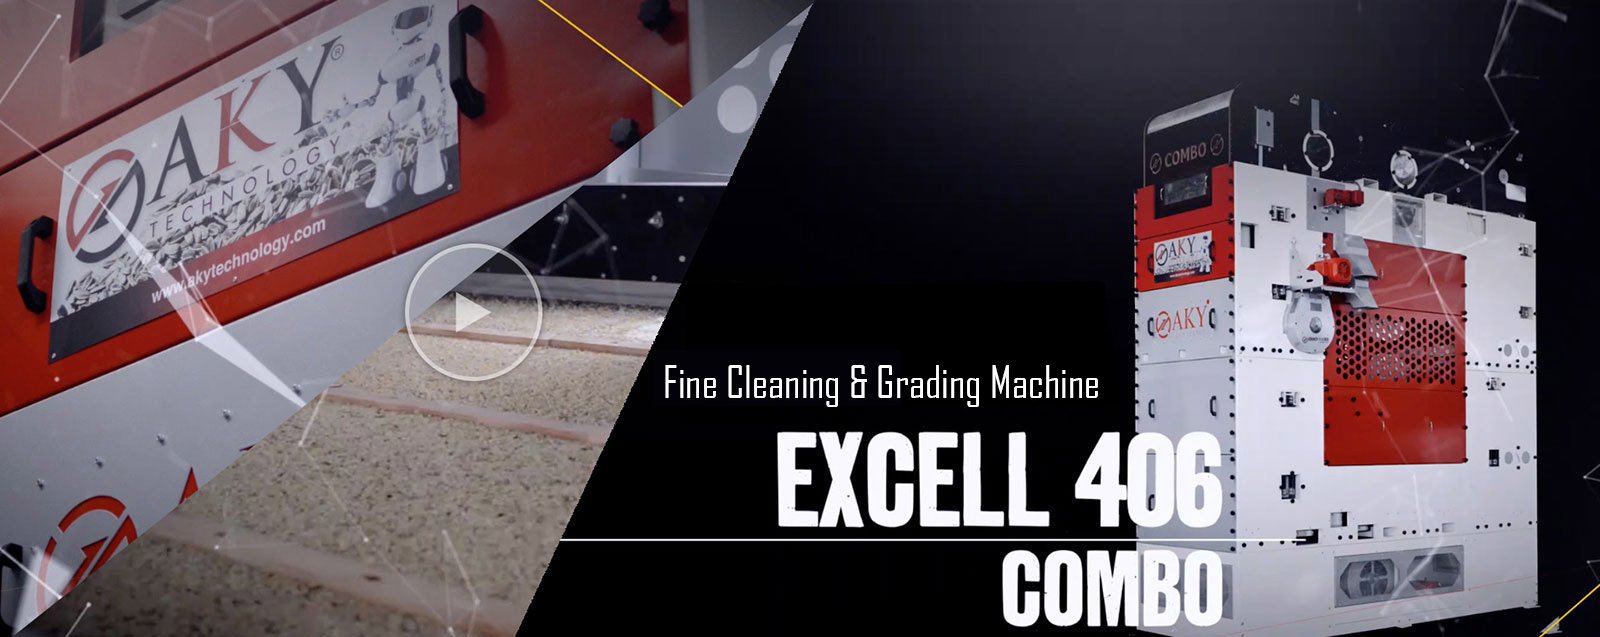 The World's Largest Pre-Cleaning and Grading Machine 